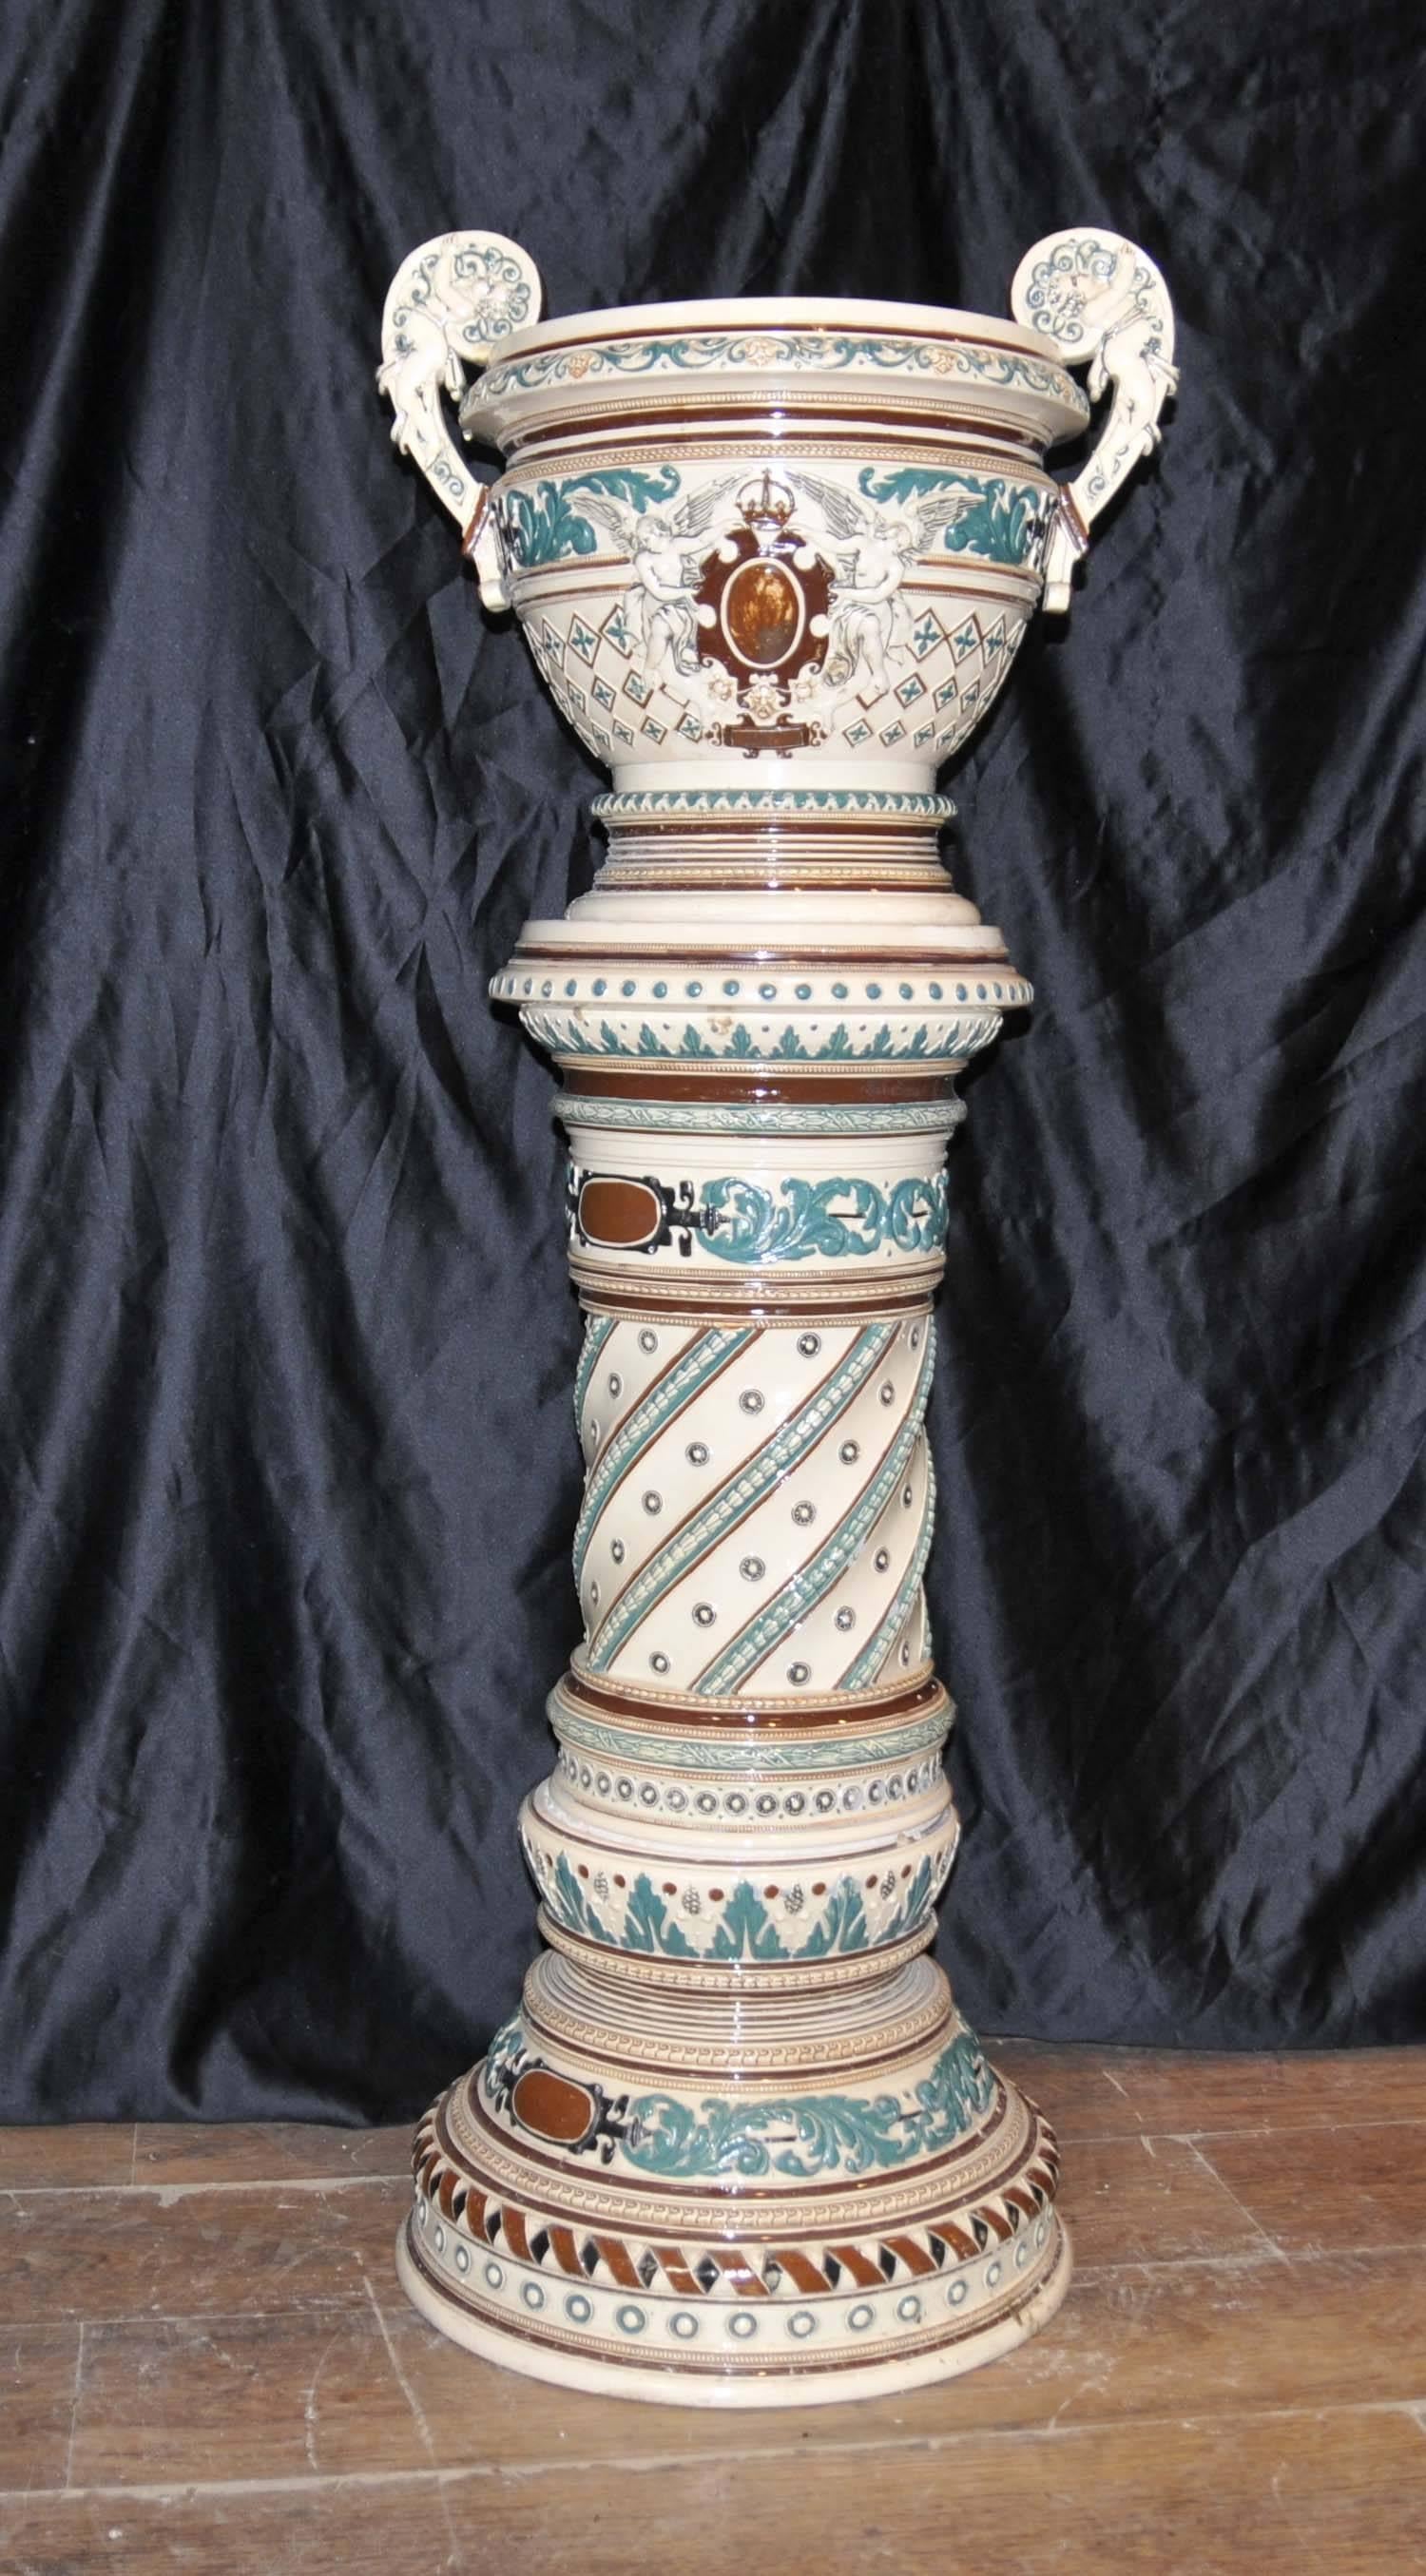 Gorgeous English Majolica porcelain planter on a stand - I love everything about this work of art, the muted earthy color palette and the deep glaze to the iron and blue colors. This will look great inside or out, to be complemented green foliage